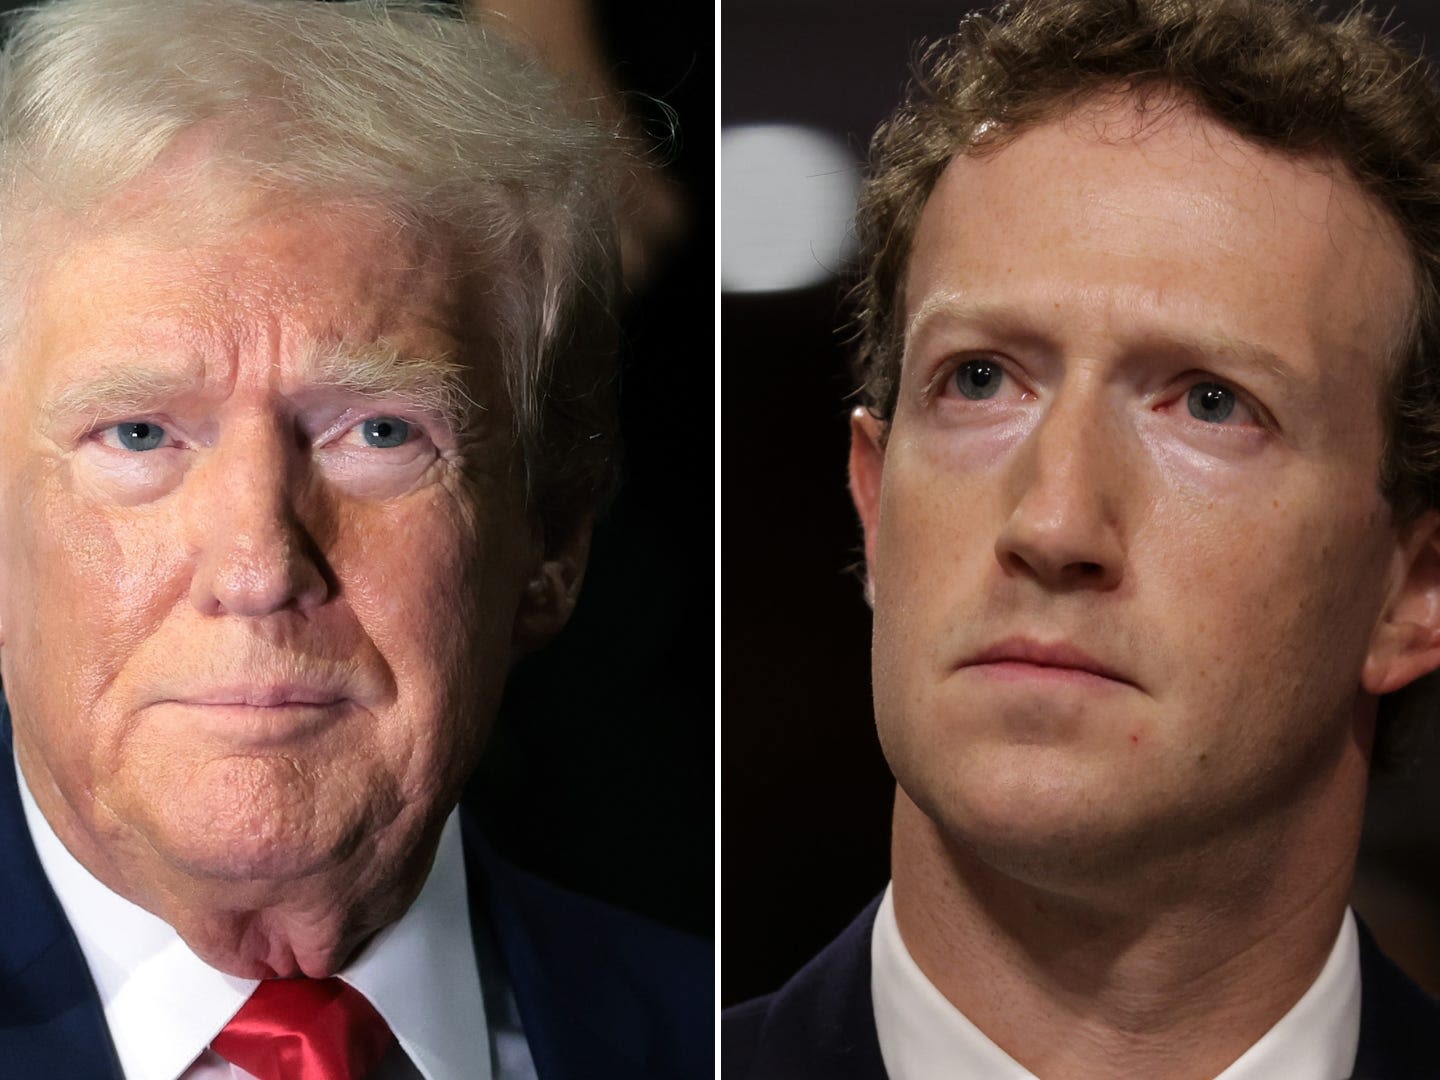 Trump's got big problems with Big Tech, and Zuckerberg is at the top of his list right now